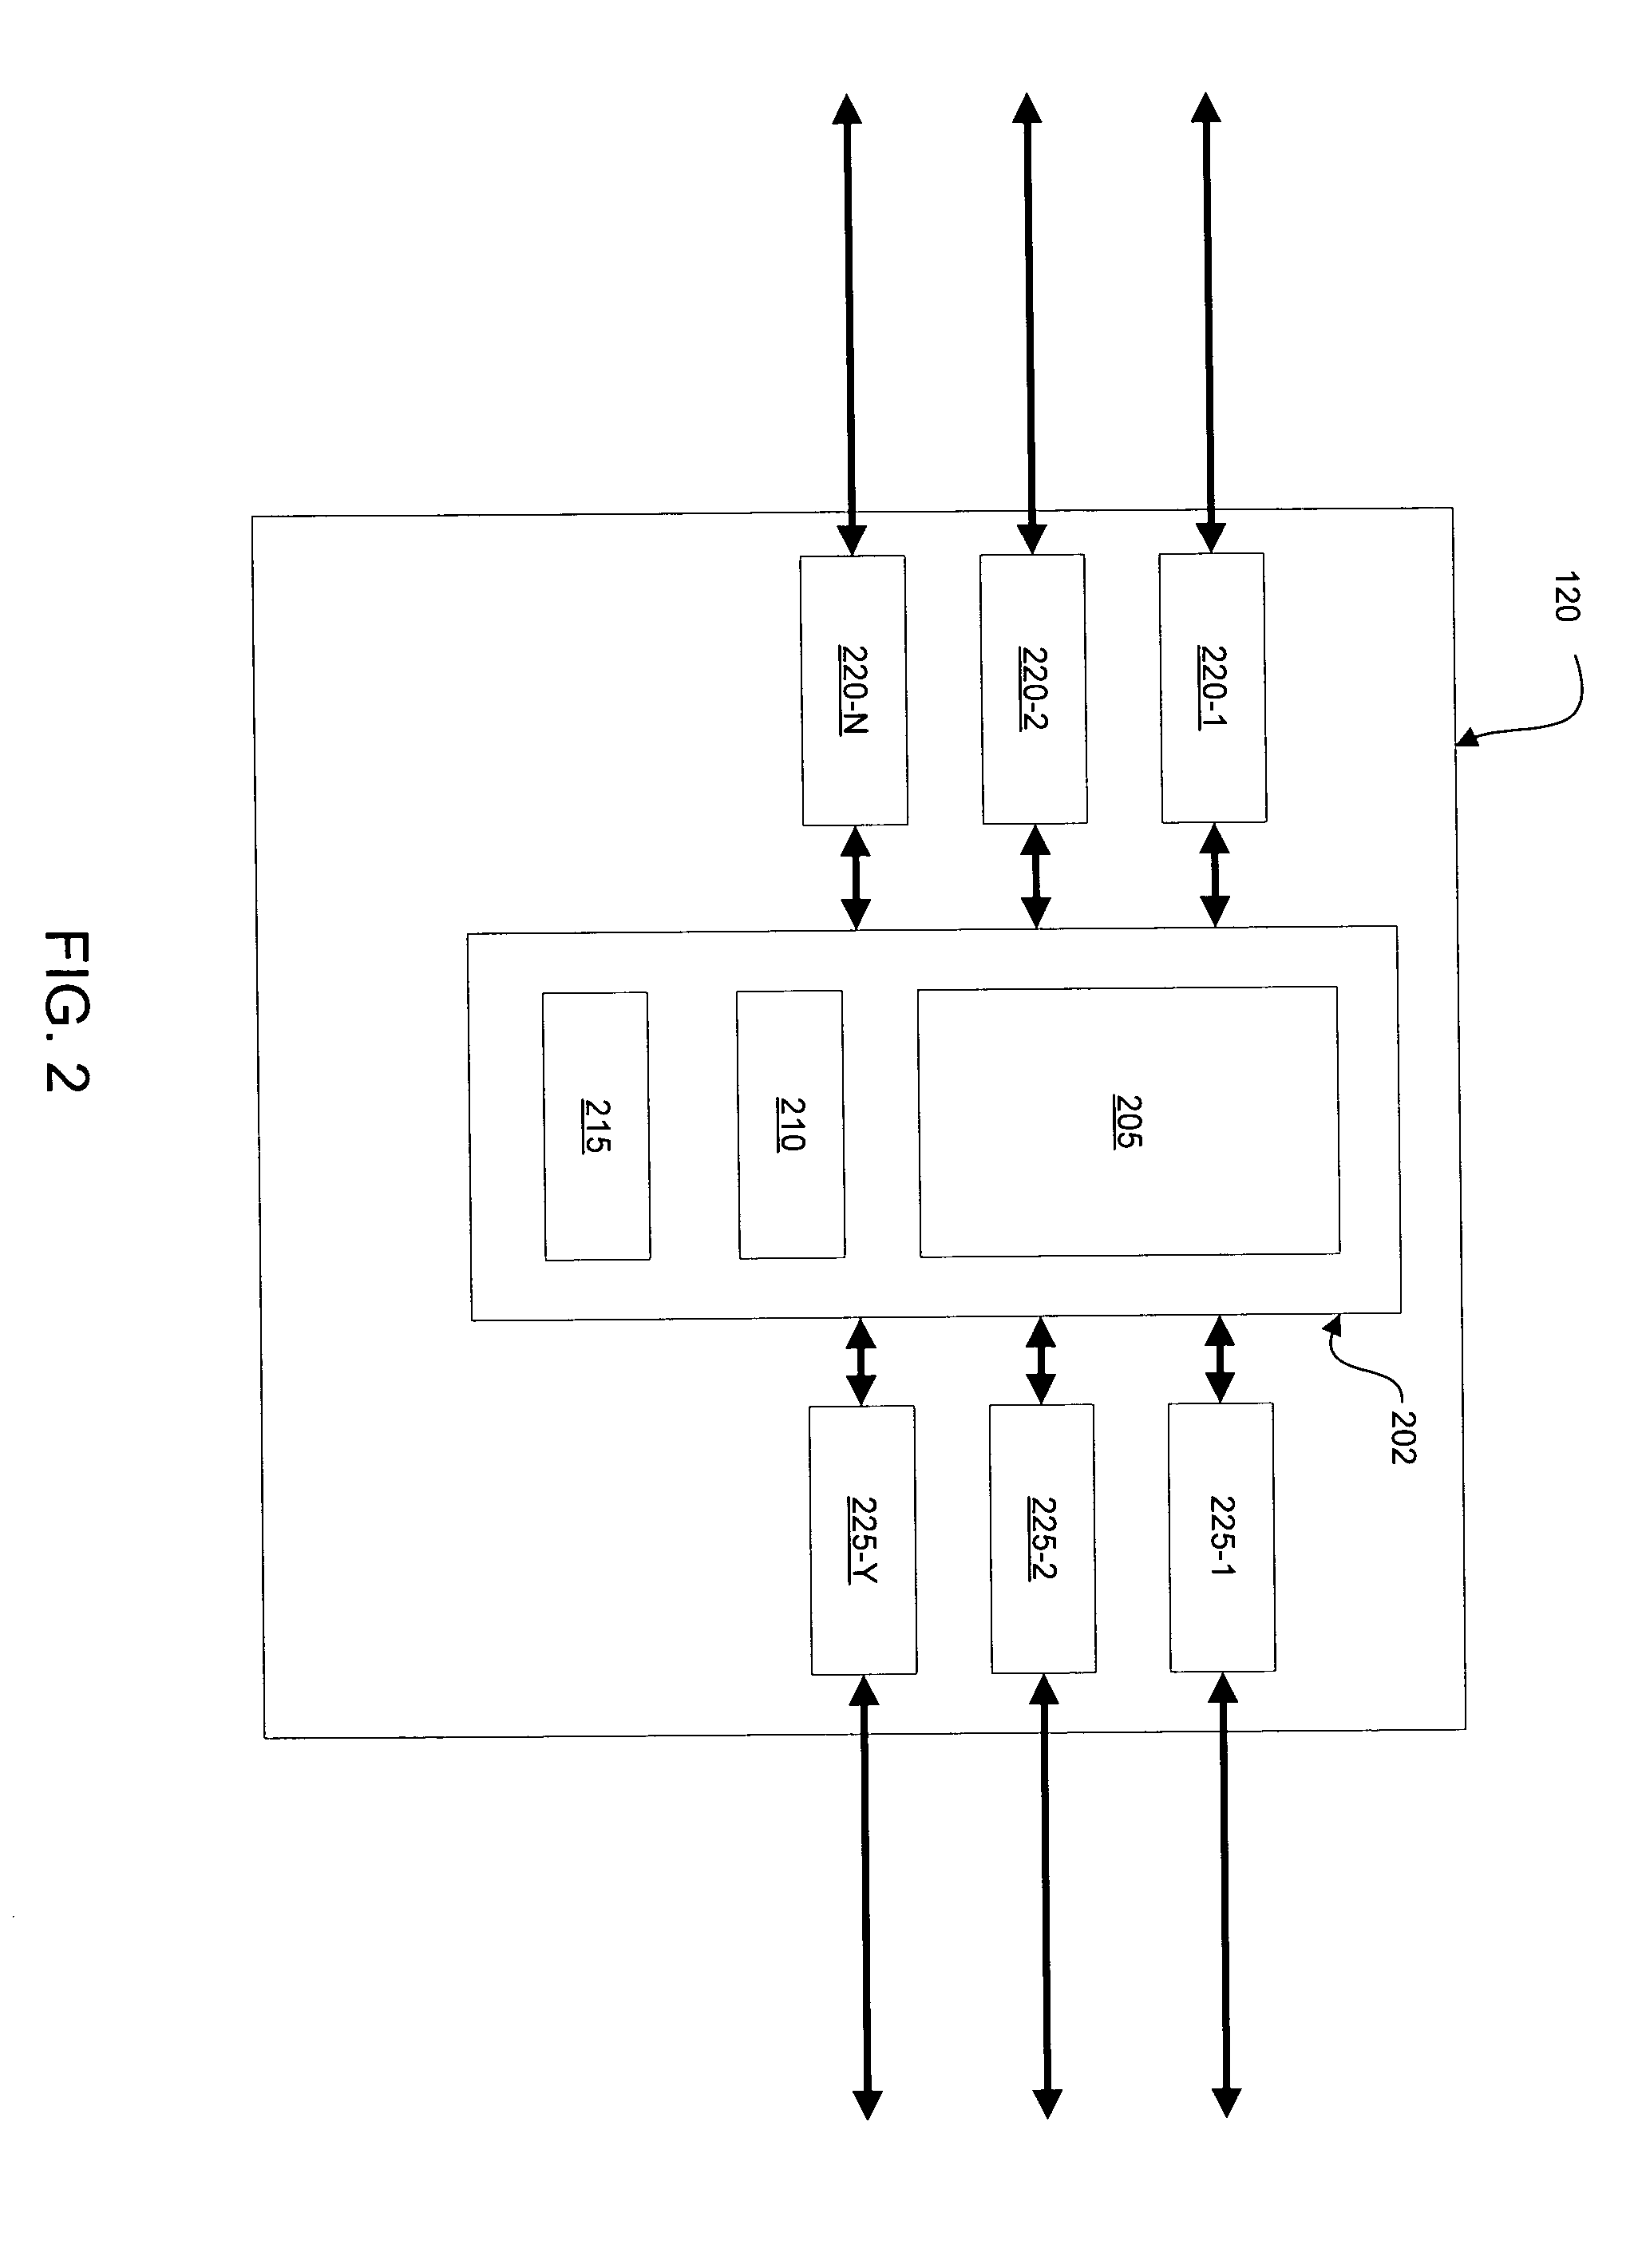 Systems and methods for providing network communications between work machines